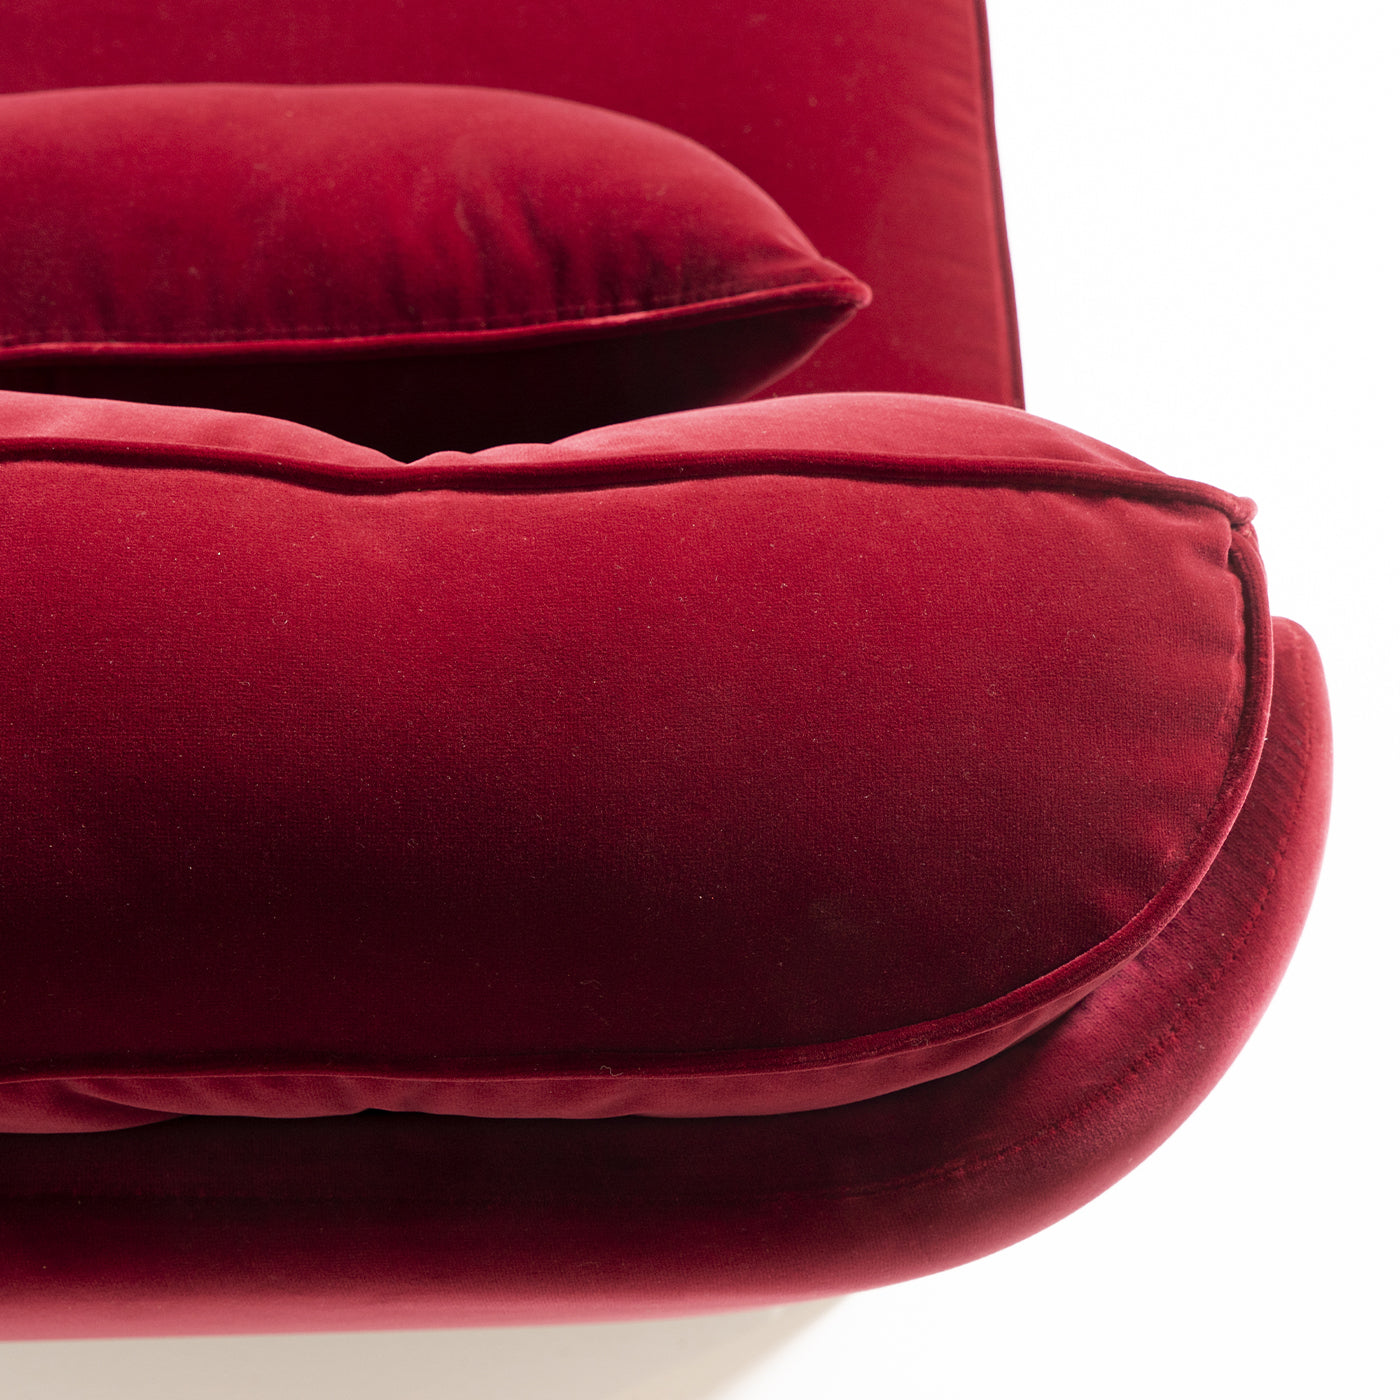 Altieri Red Armchair by Marco and Giulio Mantellassi  - Alternative view 1